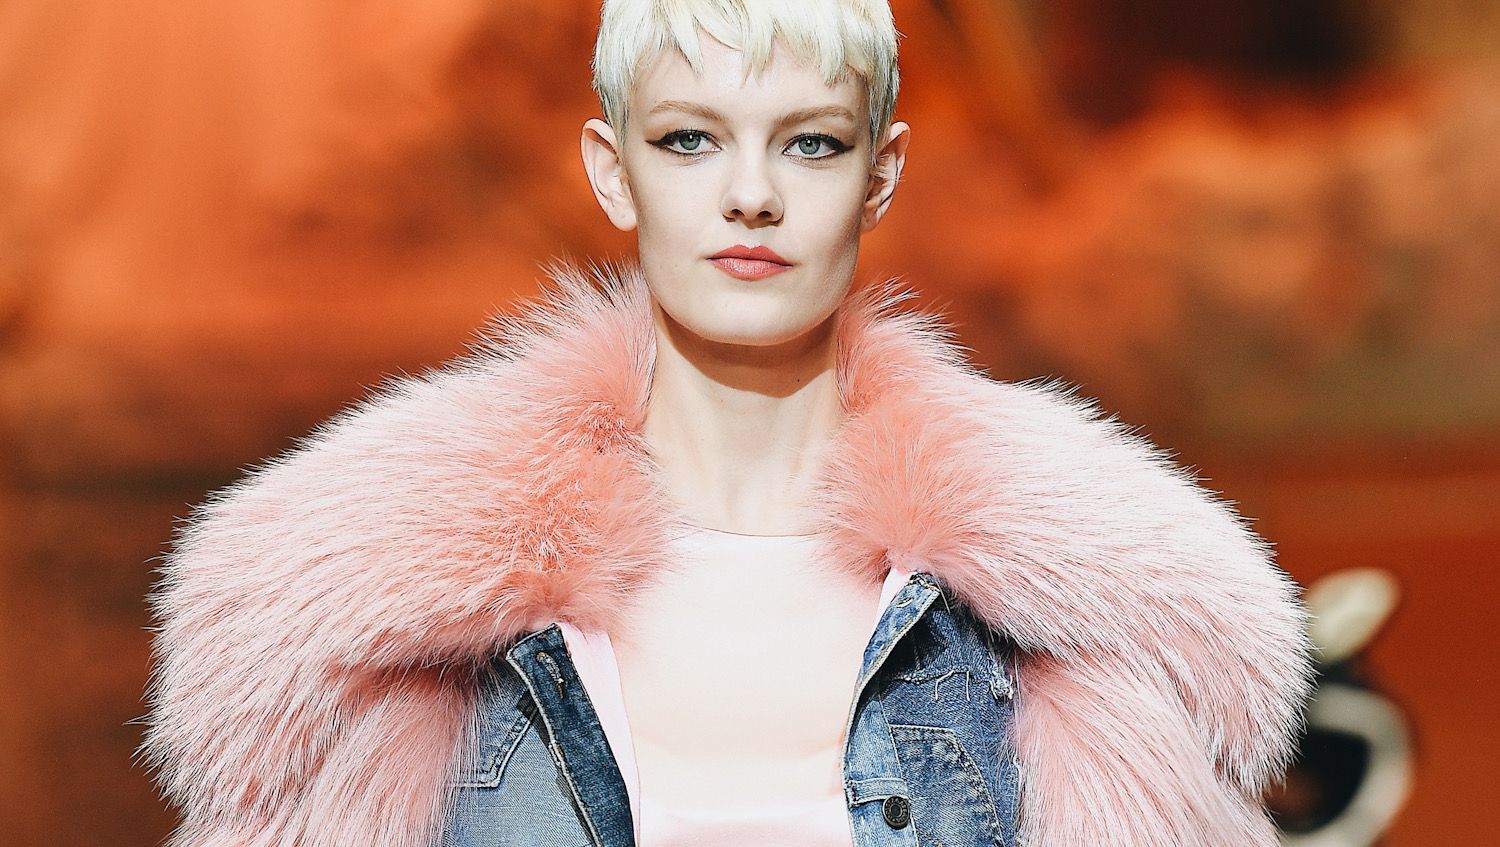 A blonde model with a pixie cut walks the runway at the Dolce & Gabbana show during Milan Fashion Week She is wearing a baby pink fur stole.